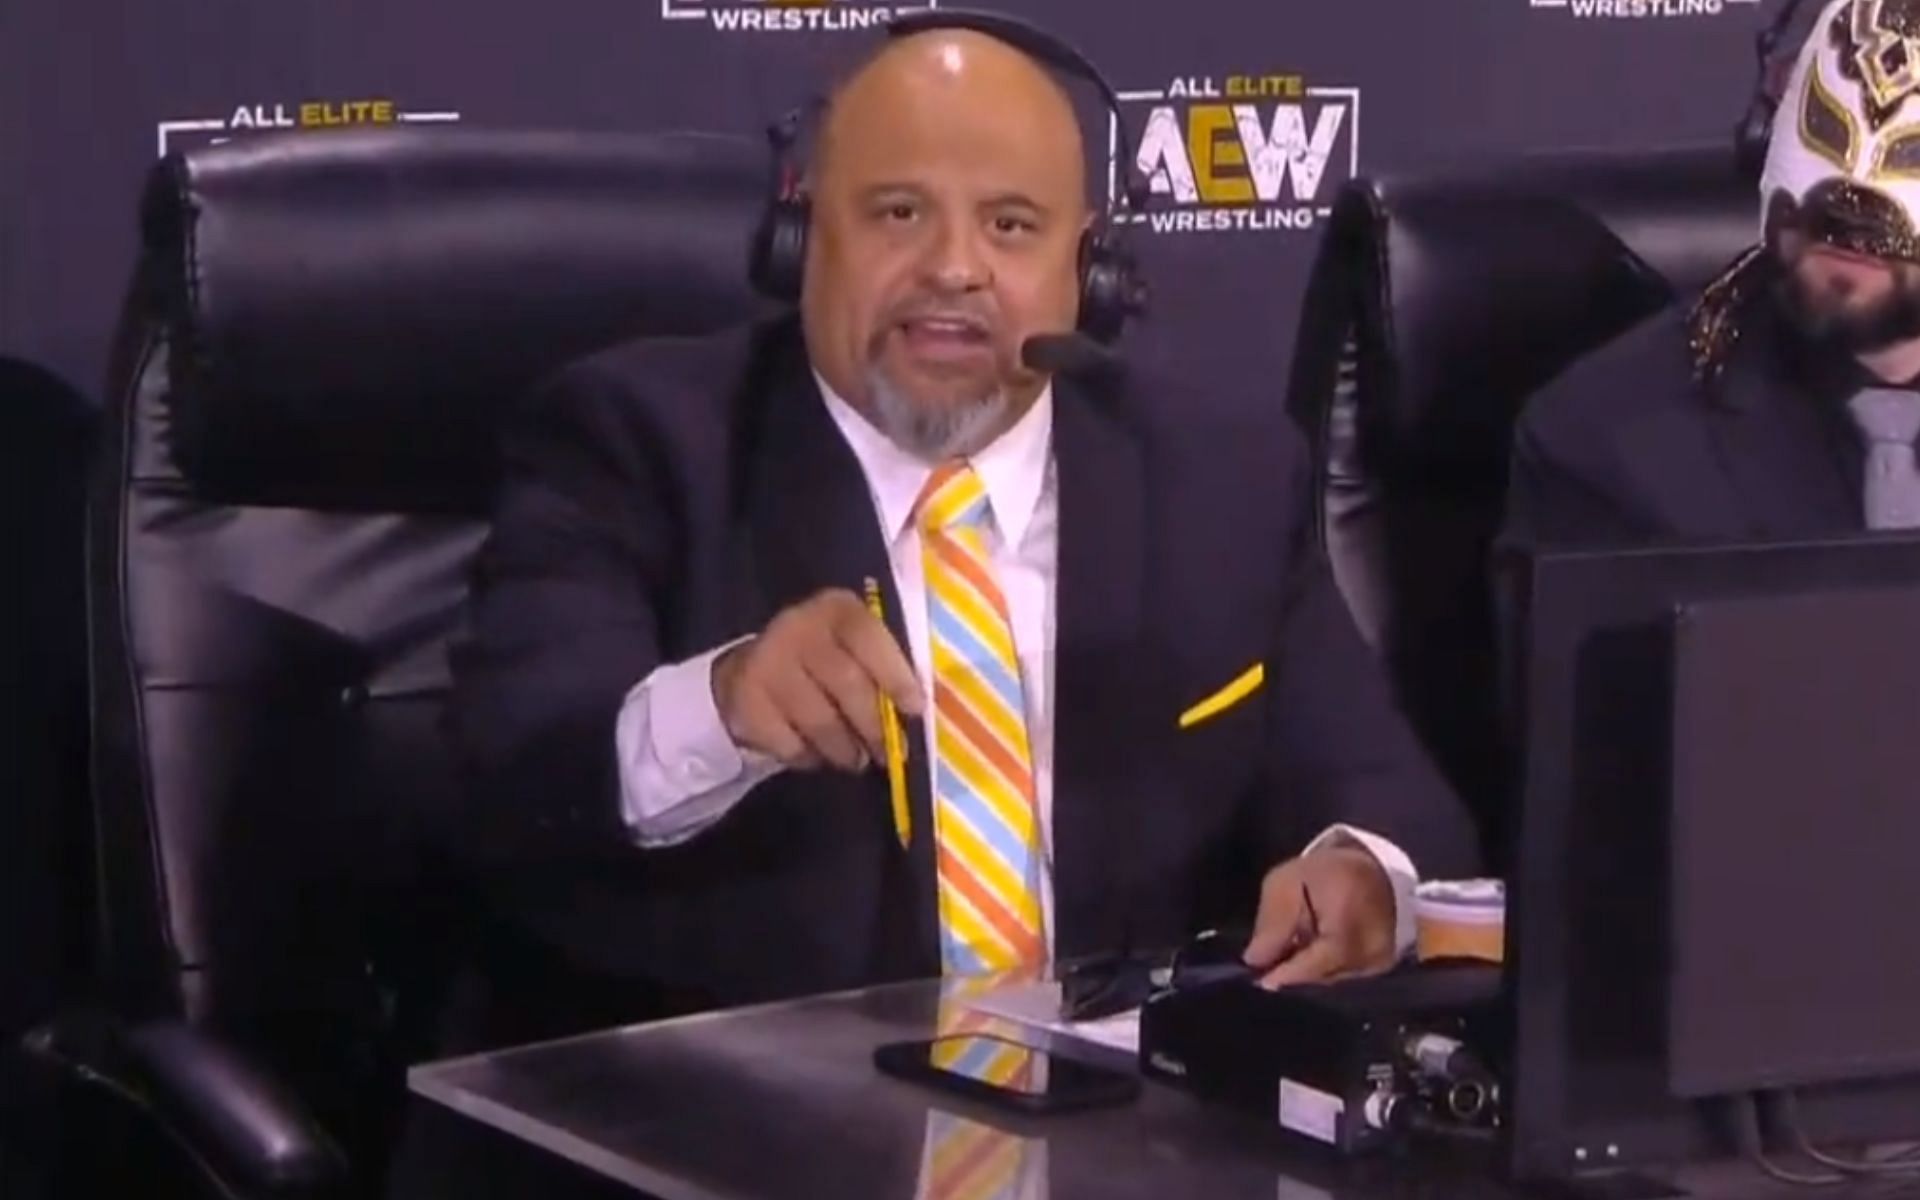 Former WWE personality and current AEW announcer, Taz